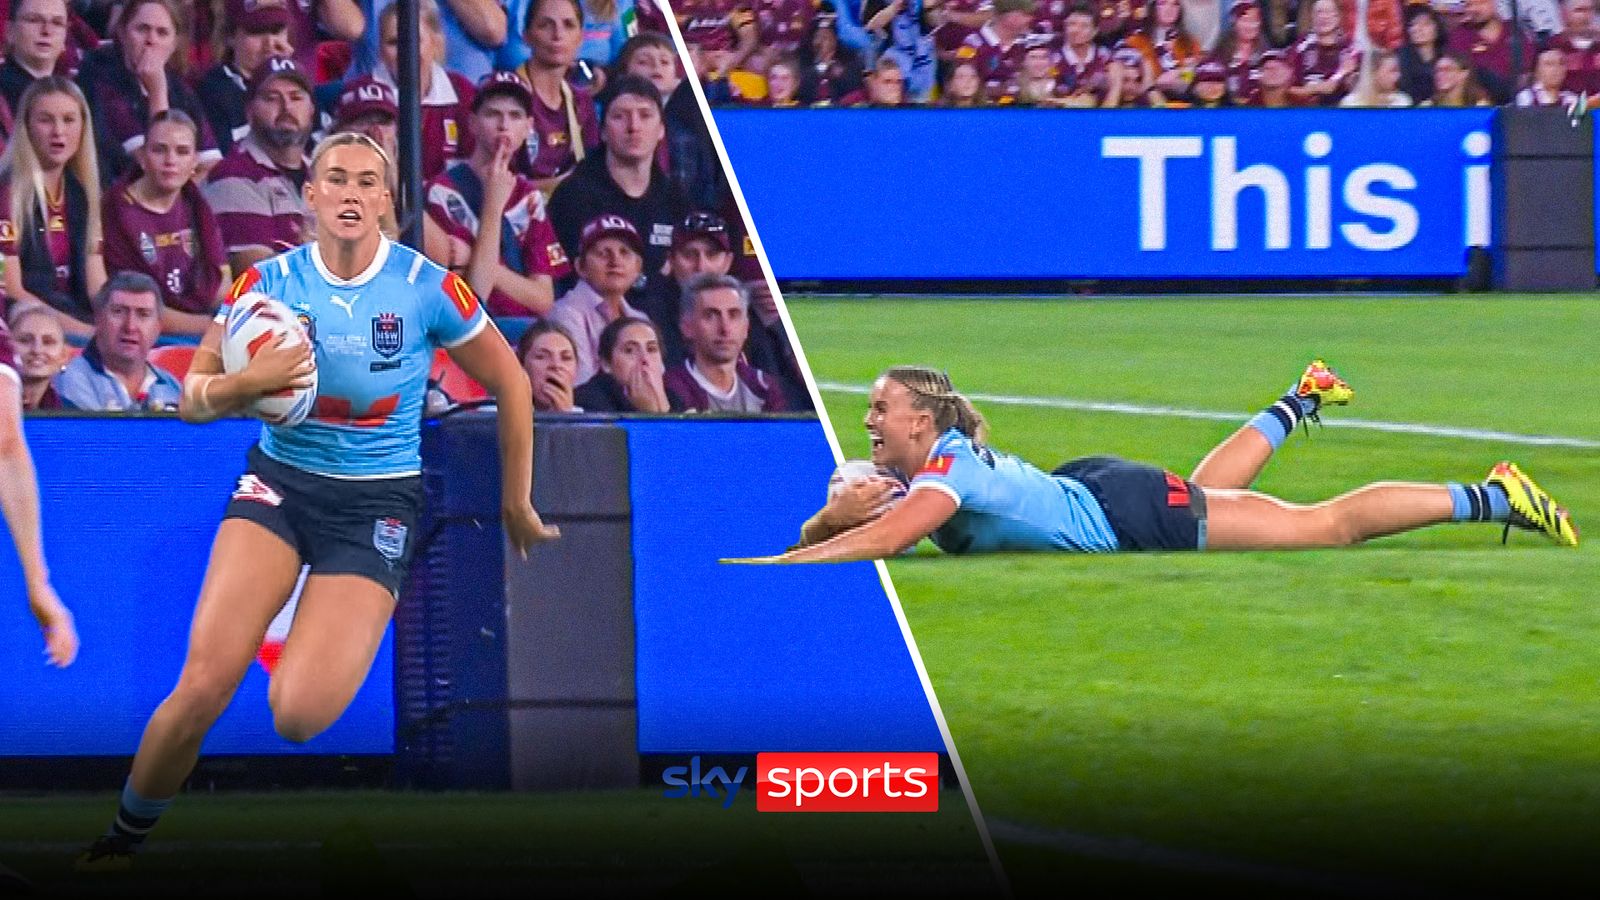 'That is breaktaking!' | Chapman scores one of the great State of Origin tries